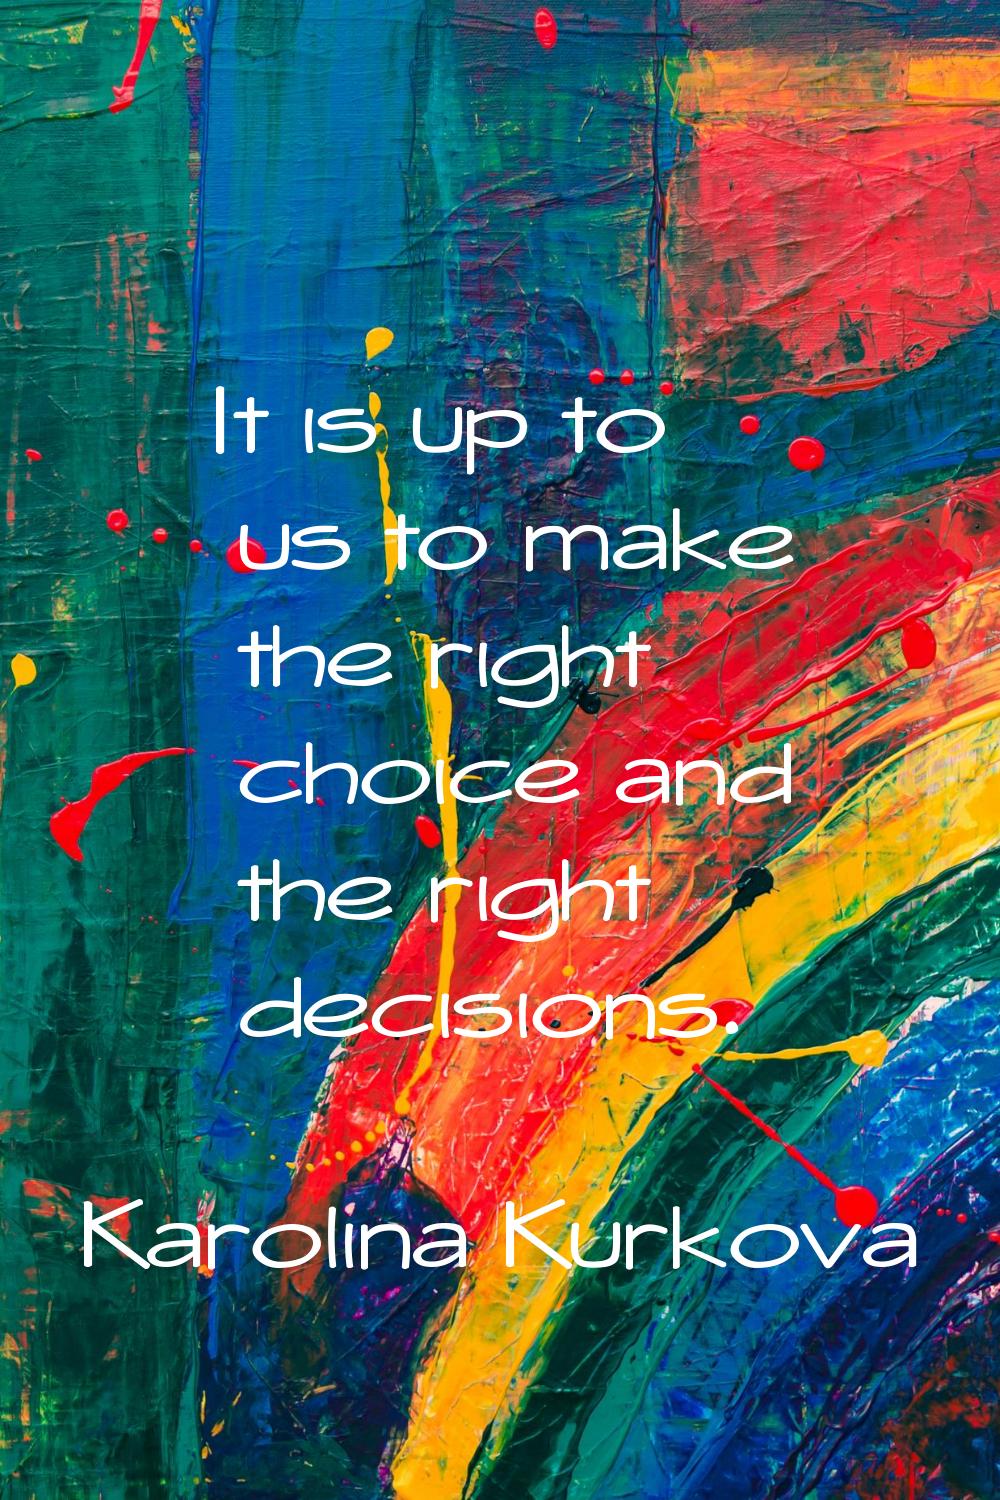 It is up to us to make the right choice and the right decisions.